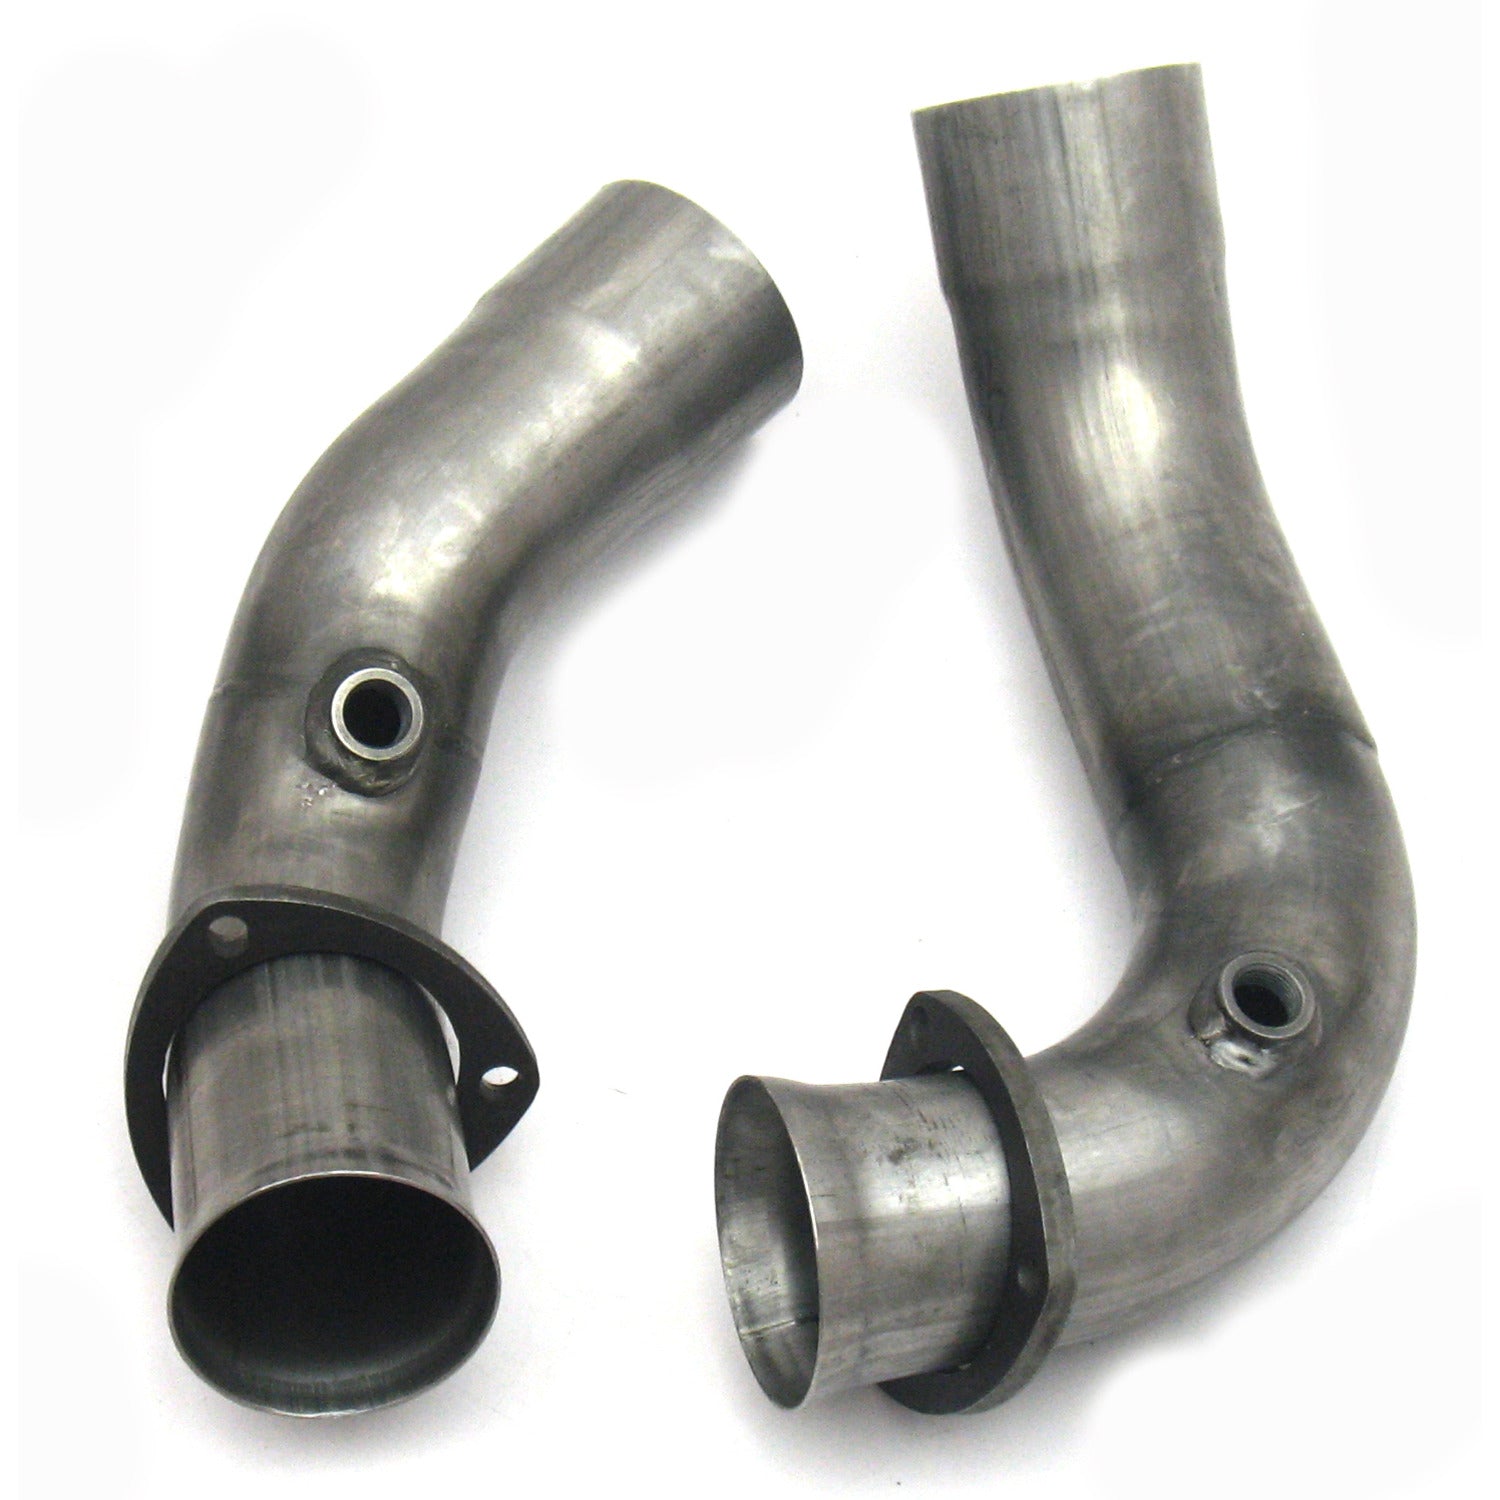 JBA Performance Exhaust 1860SY 3" Stainless Steel Mid-Pipe Down Pipes for 1860/61 for 8.1L with Allison Transmission